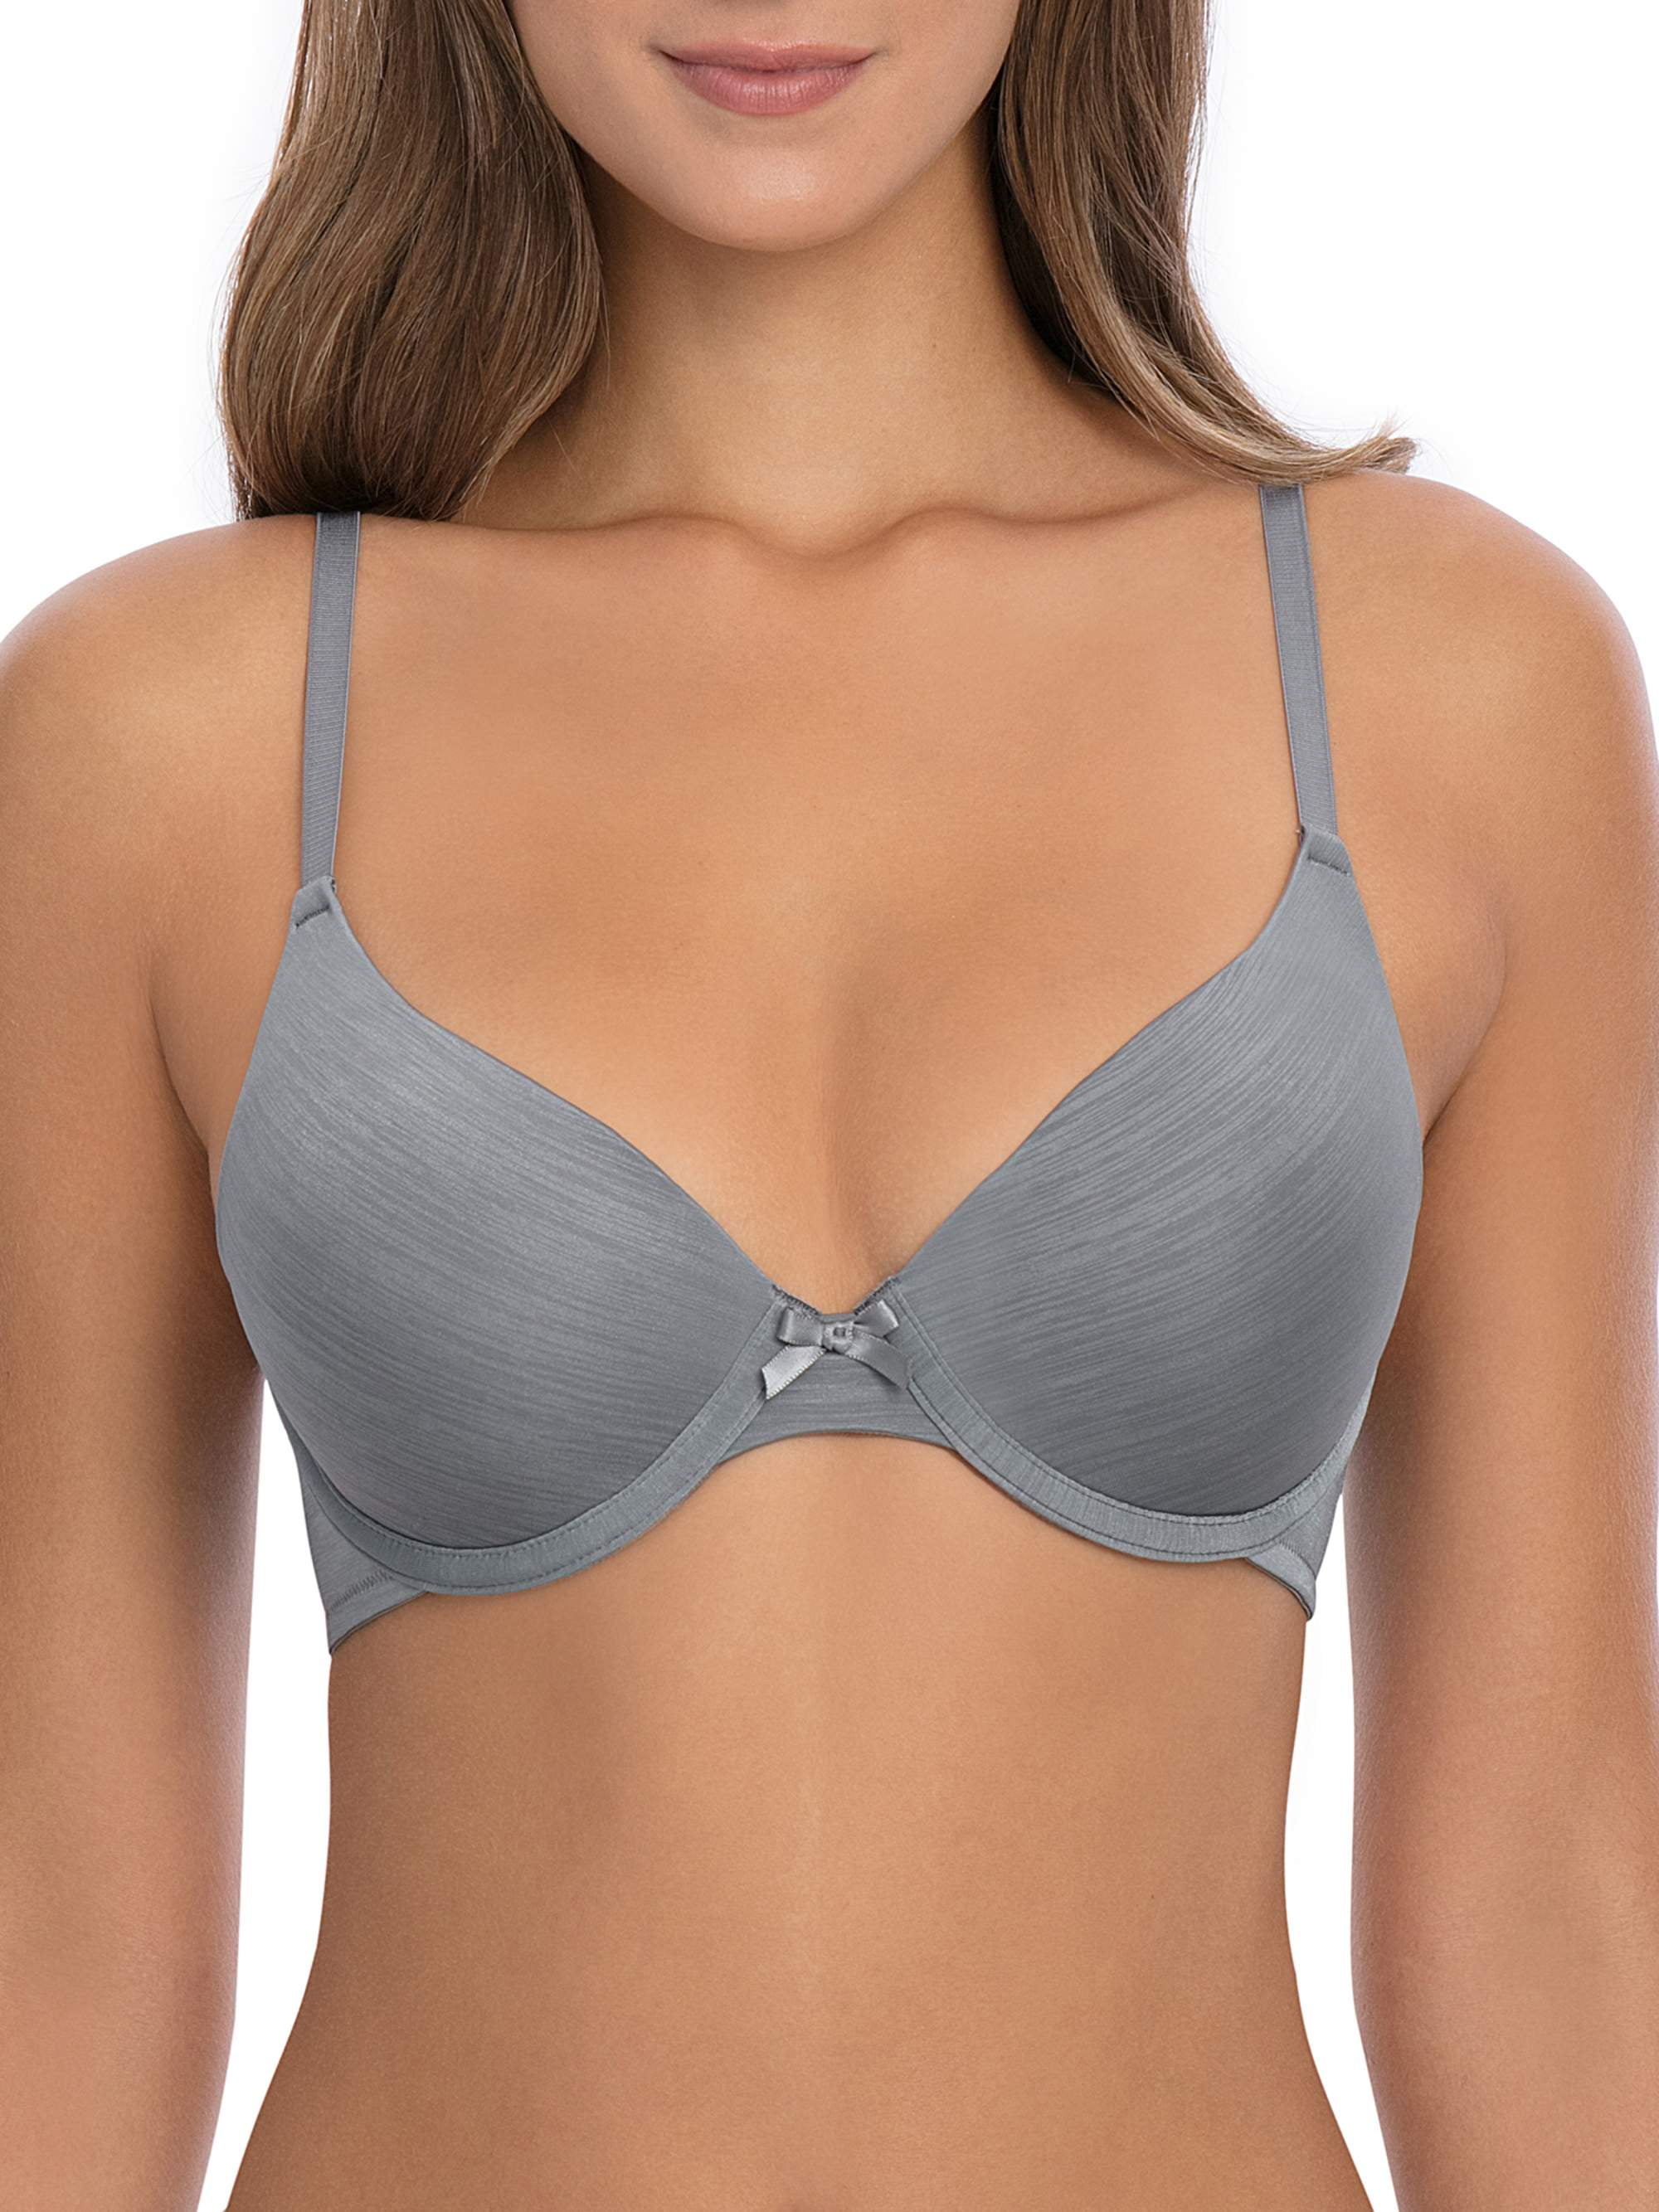 Walmart Norton - Secret Treasure bras now on clearance for $3! Don't miss  out this great deal!